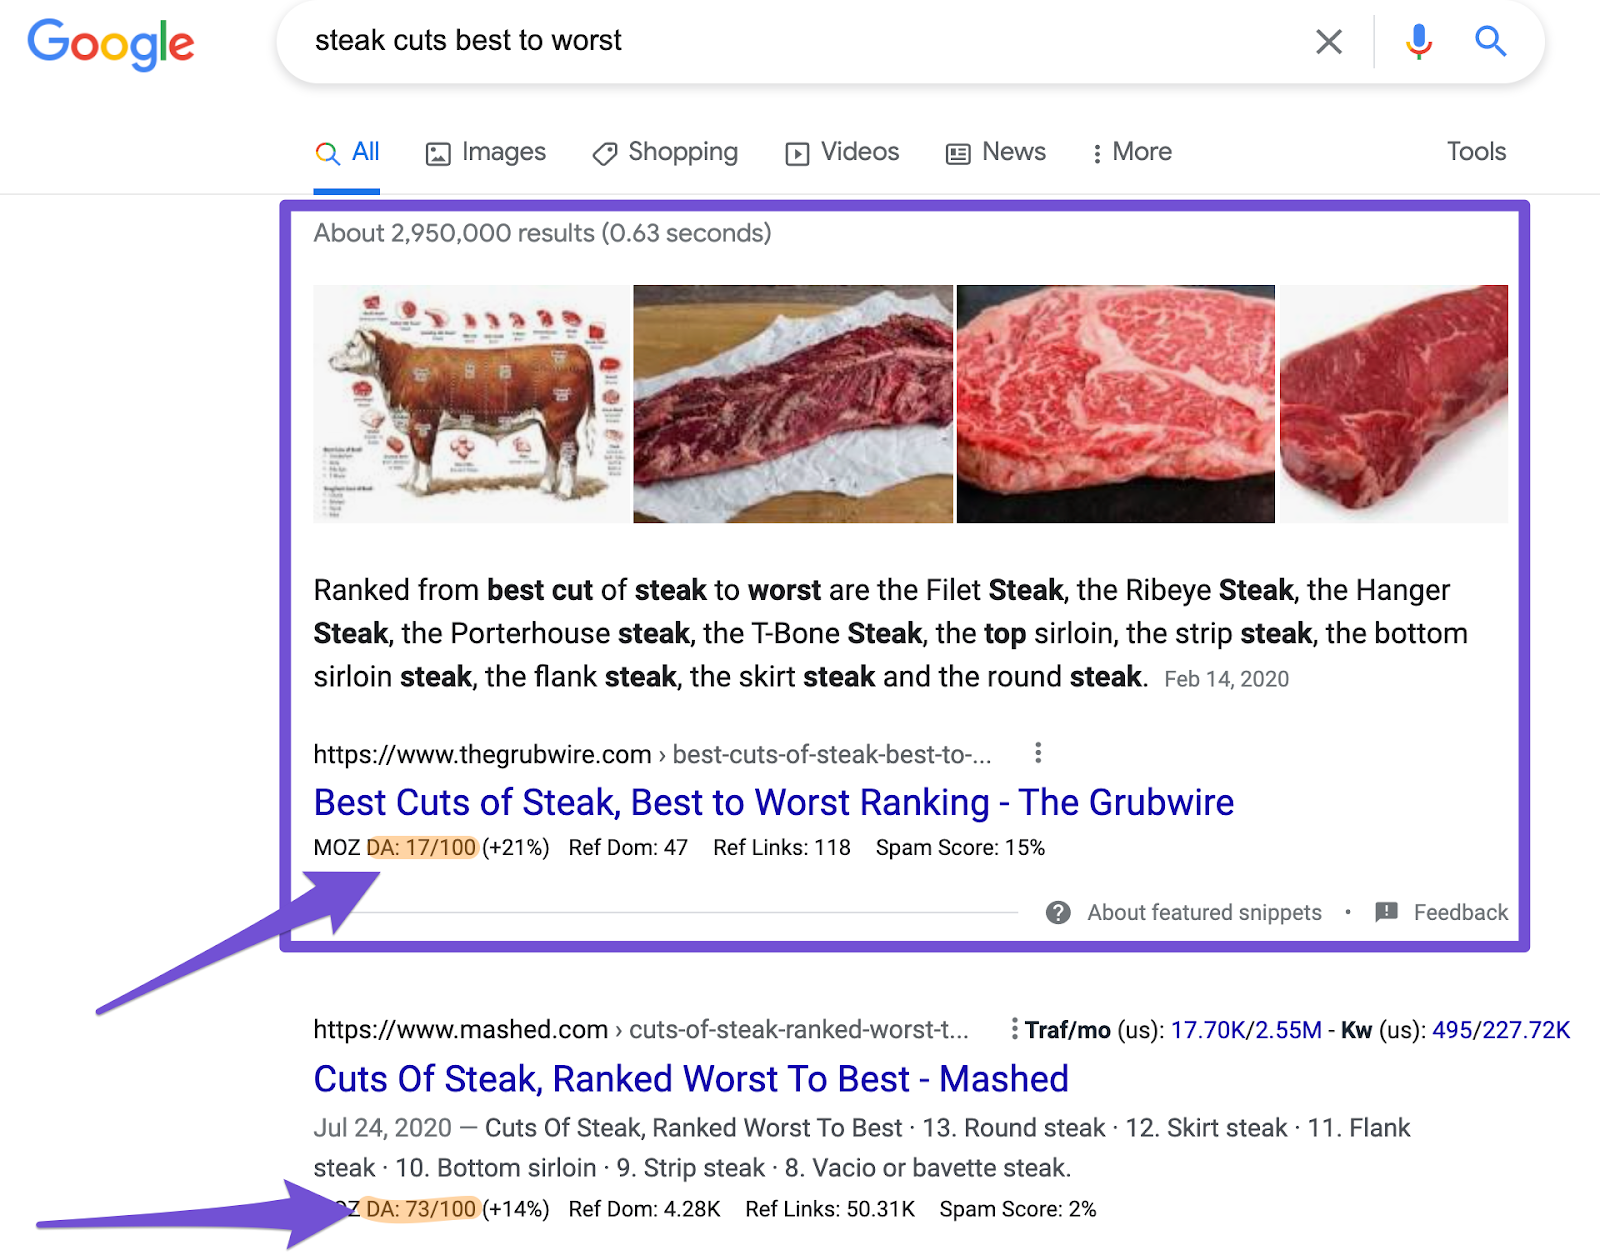 paragraph featured snippet